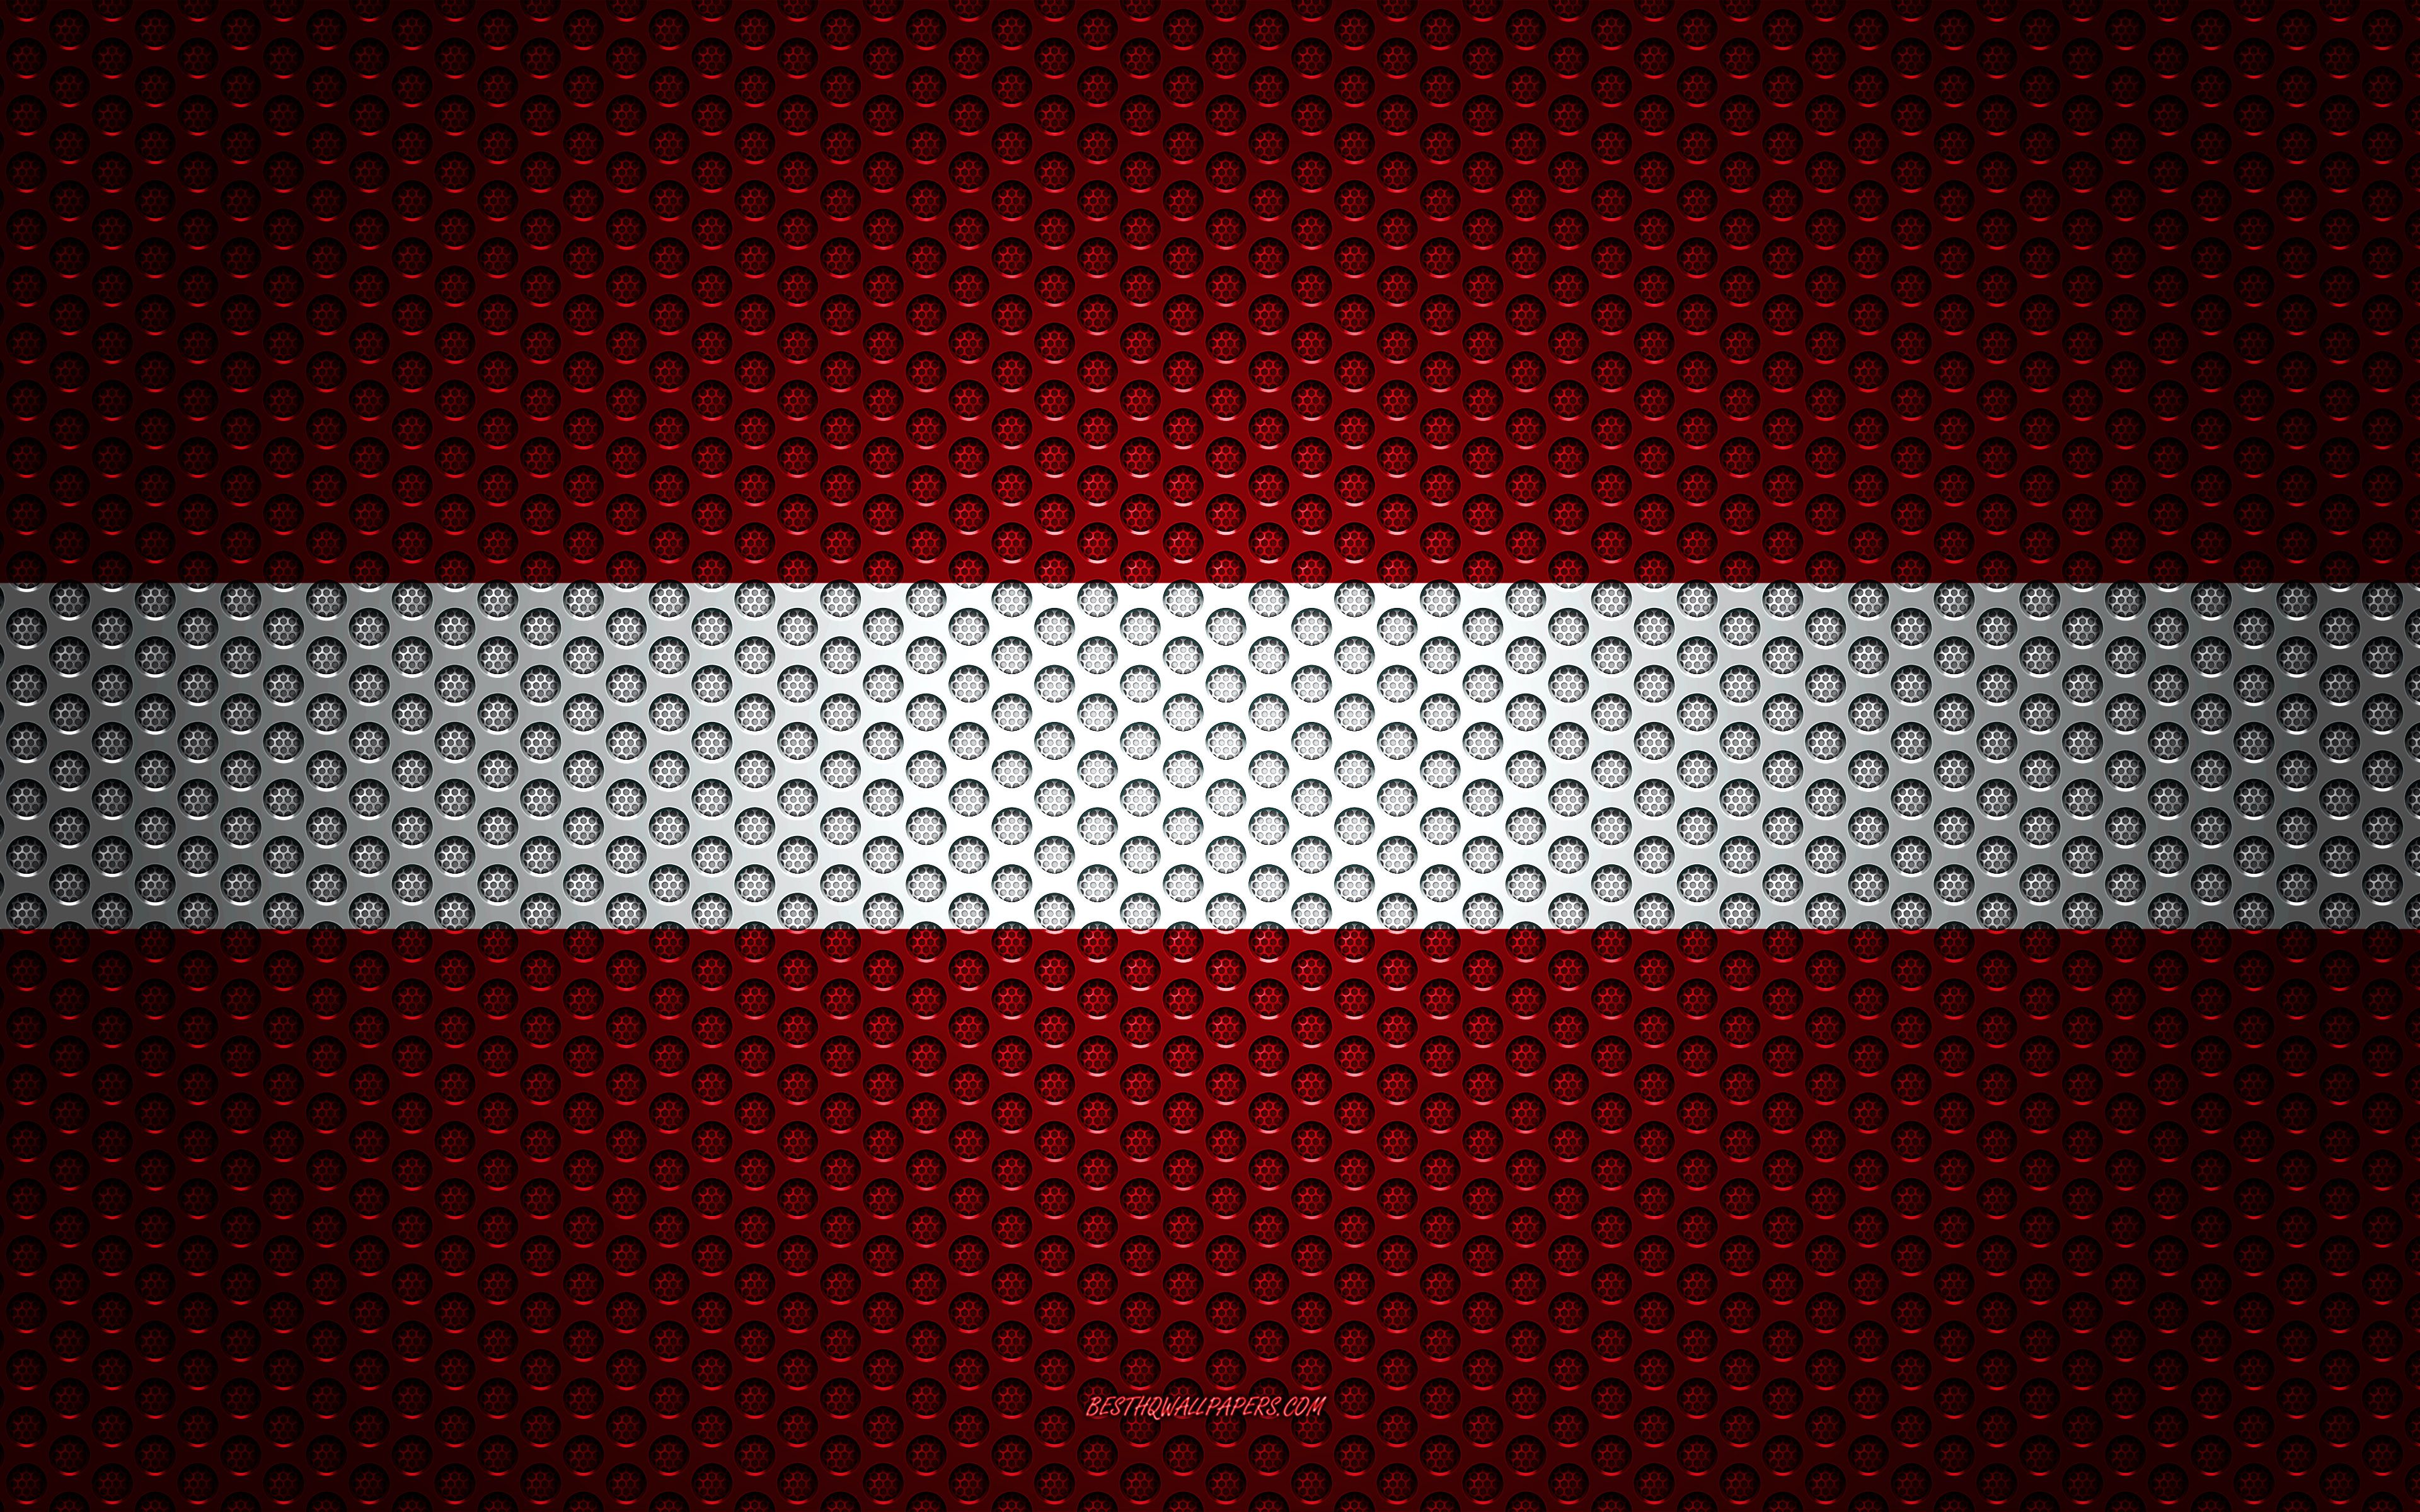 Download wallpaper Flag of Latvia, 4k, creative art, metal mesh texture, Latvian flag, national symbol, Latvia, Europe, flags of European countries for desktop with resolution 3840x2400. High Quality HD picture wallpaper